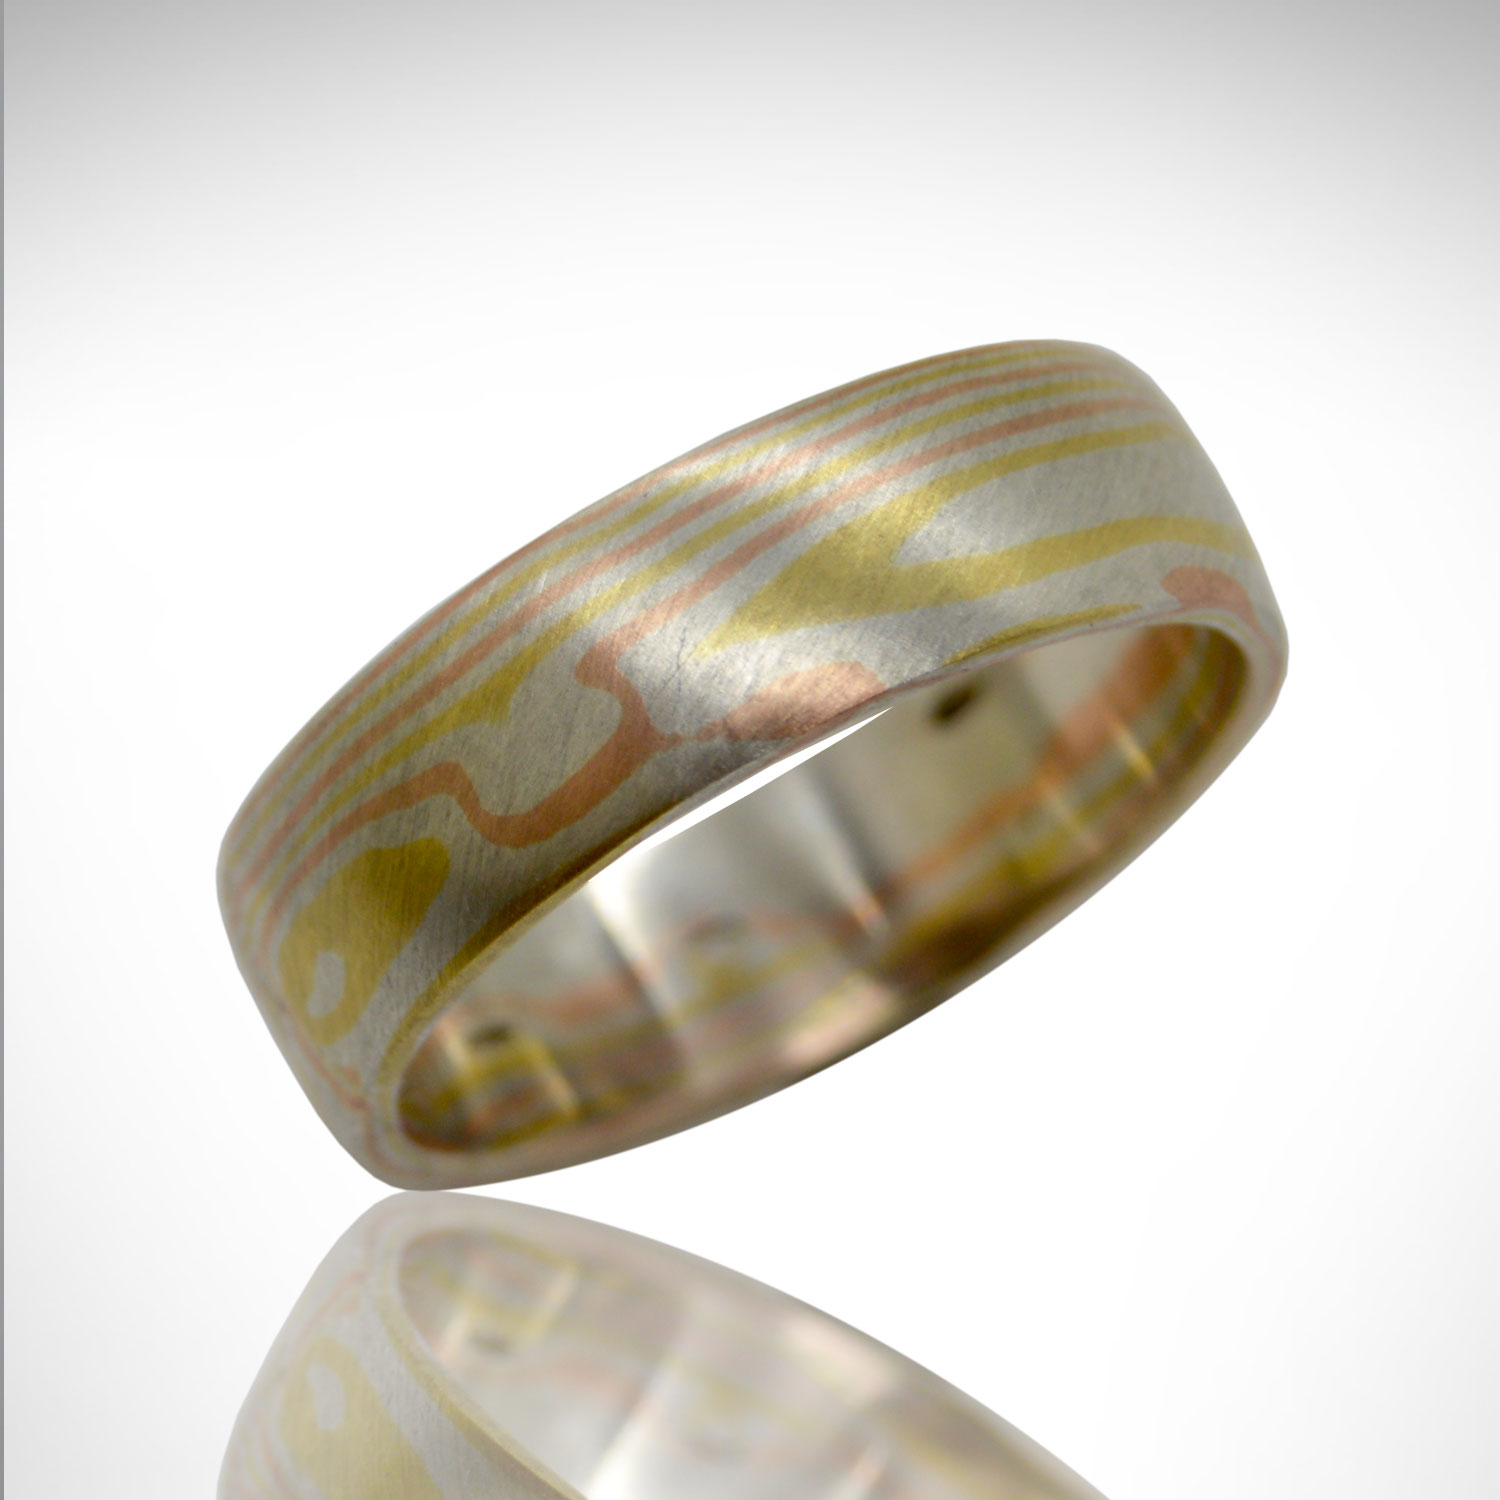 Mokume Gane Ring in 18Kt Yellow, 14Kt Palladium White Gold and Sterling Silver, hand fabricated designed by Morgan's Treasure